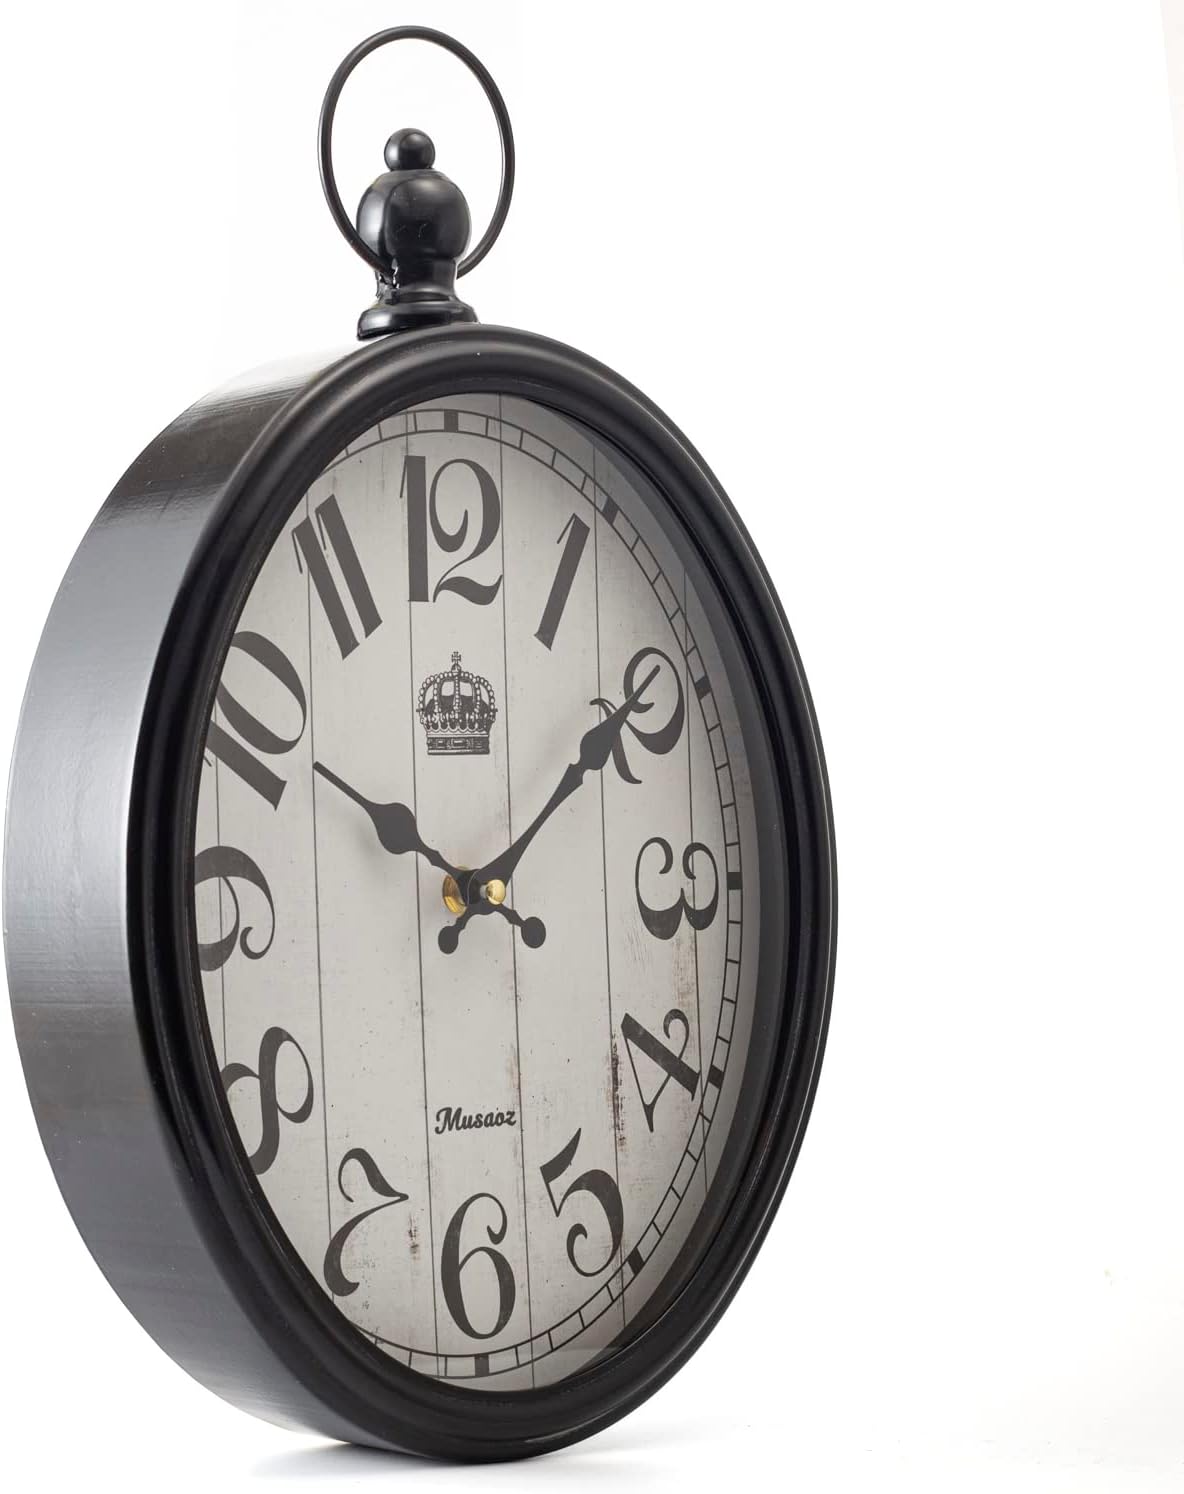 Musaoz Oval Large Wall Clock Review